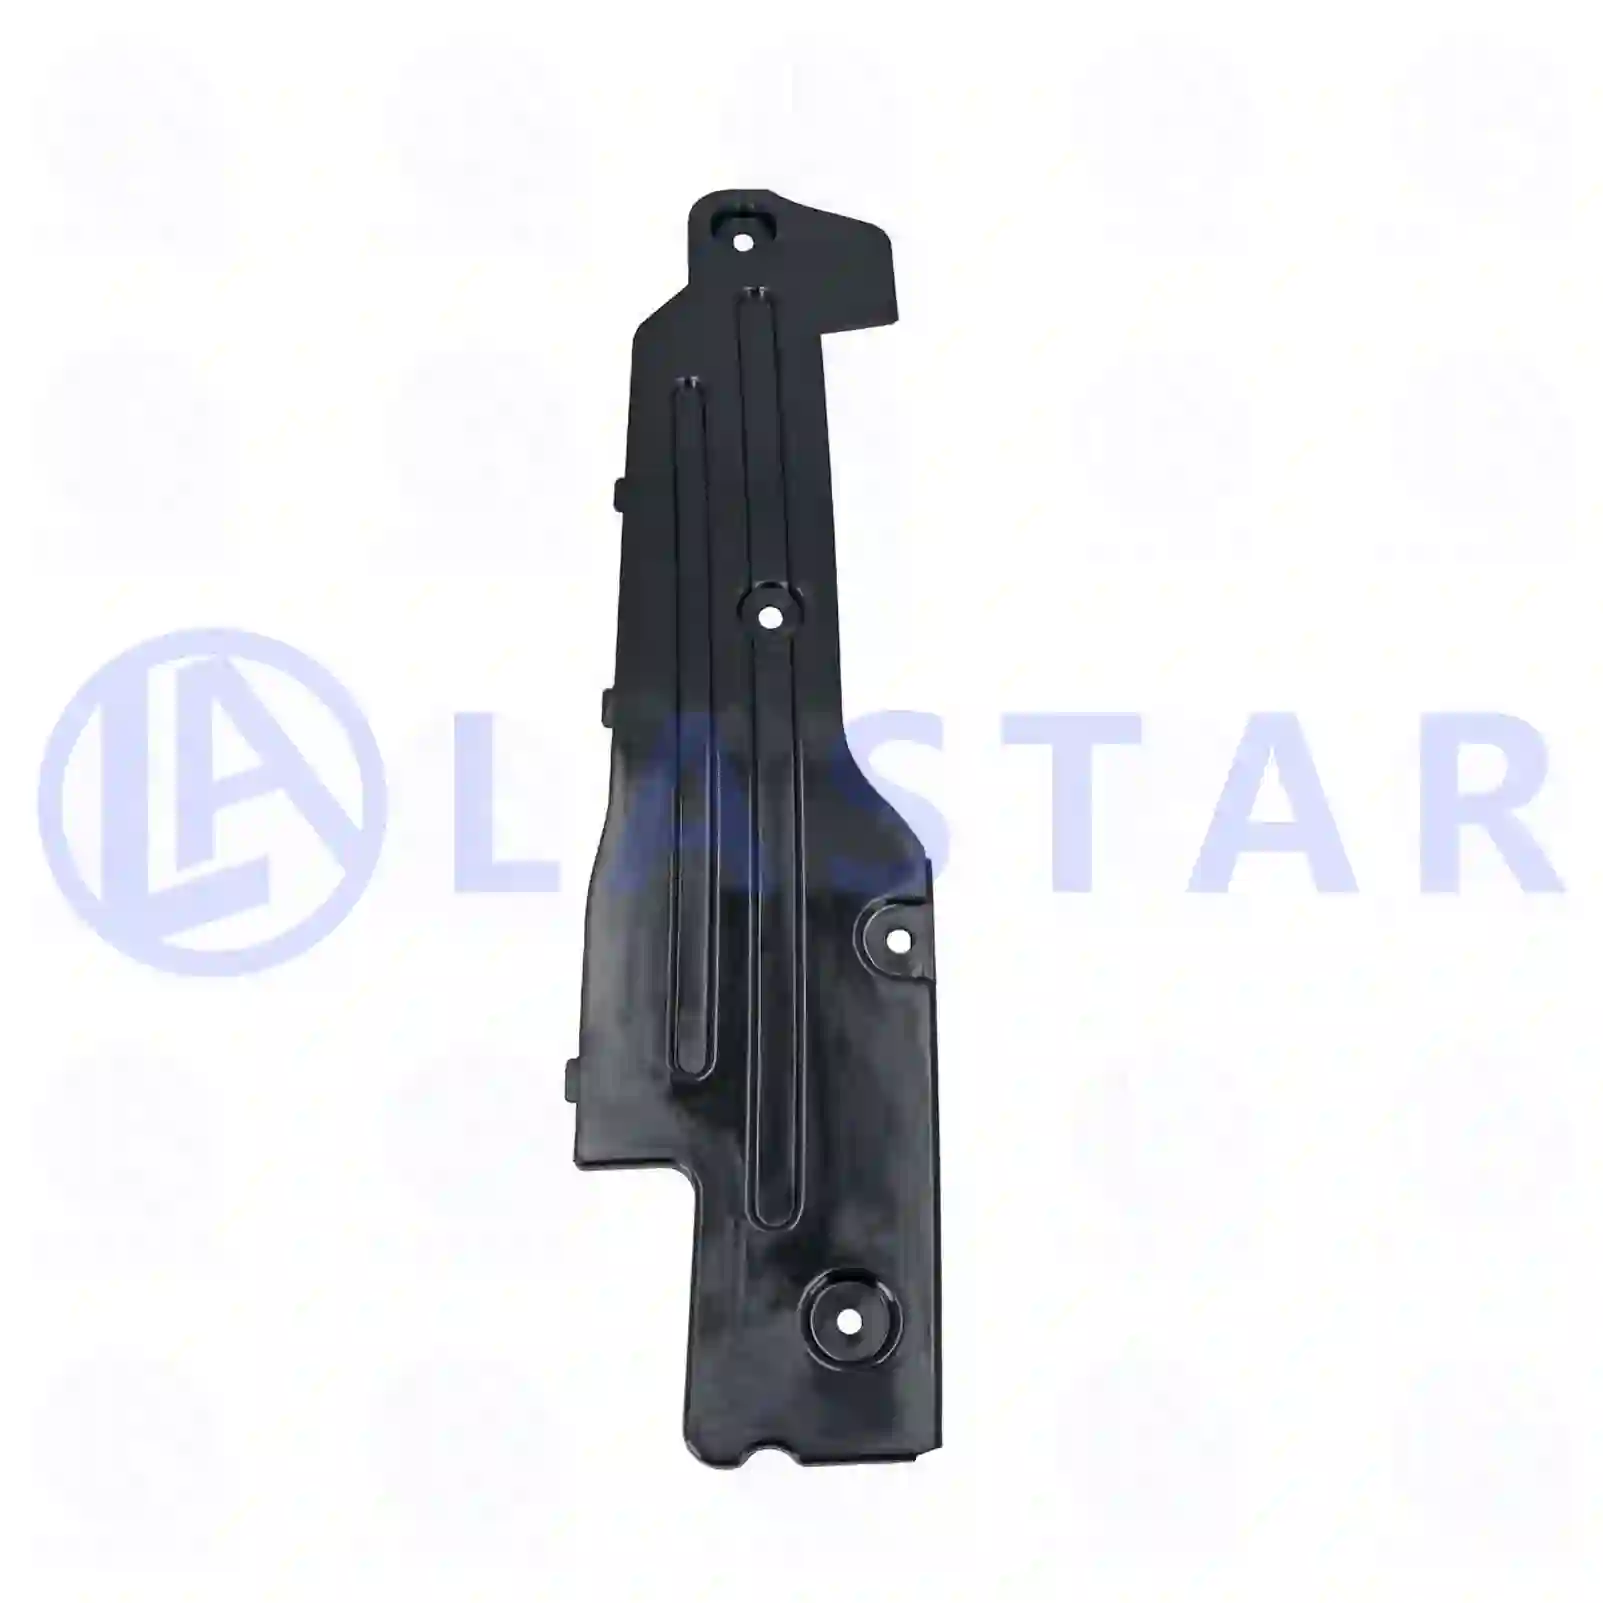 Cover, lamp housing, right, 77711065, 20453931, 20507021, 21359260, ZG20015-0008 ||  77711065 Lastar Spare Part | Truck Spare Parts, Auotomotive Spare Parts Cover, lamp housing, right, 77711065, 20453931, 20507021, 21359260, ZG20015-0008 ||  77711065 Lastar Spare Part | Truck Spare Parts, Auotomotive Spare Parts